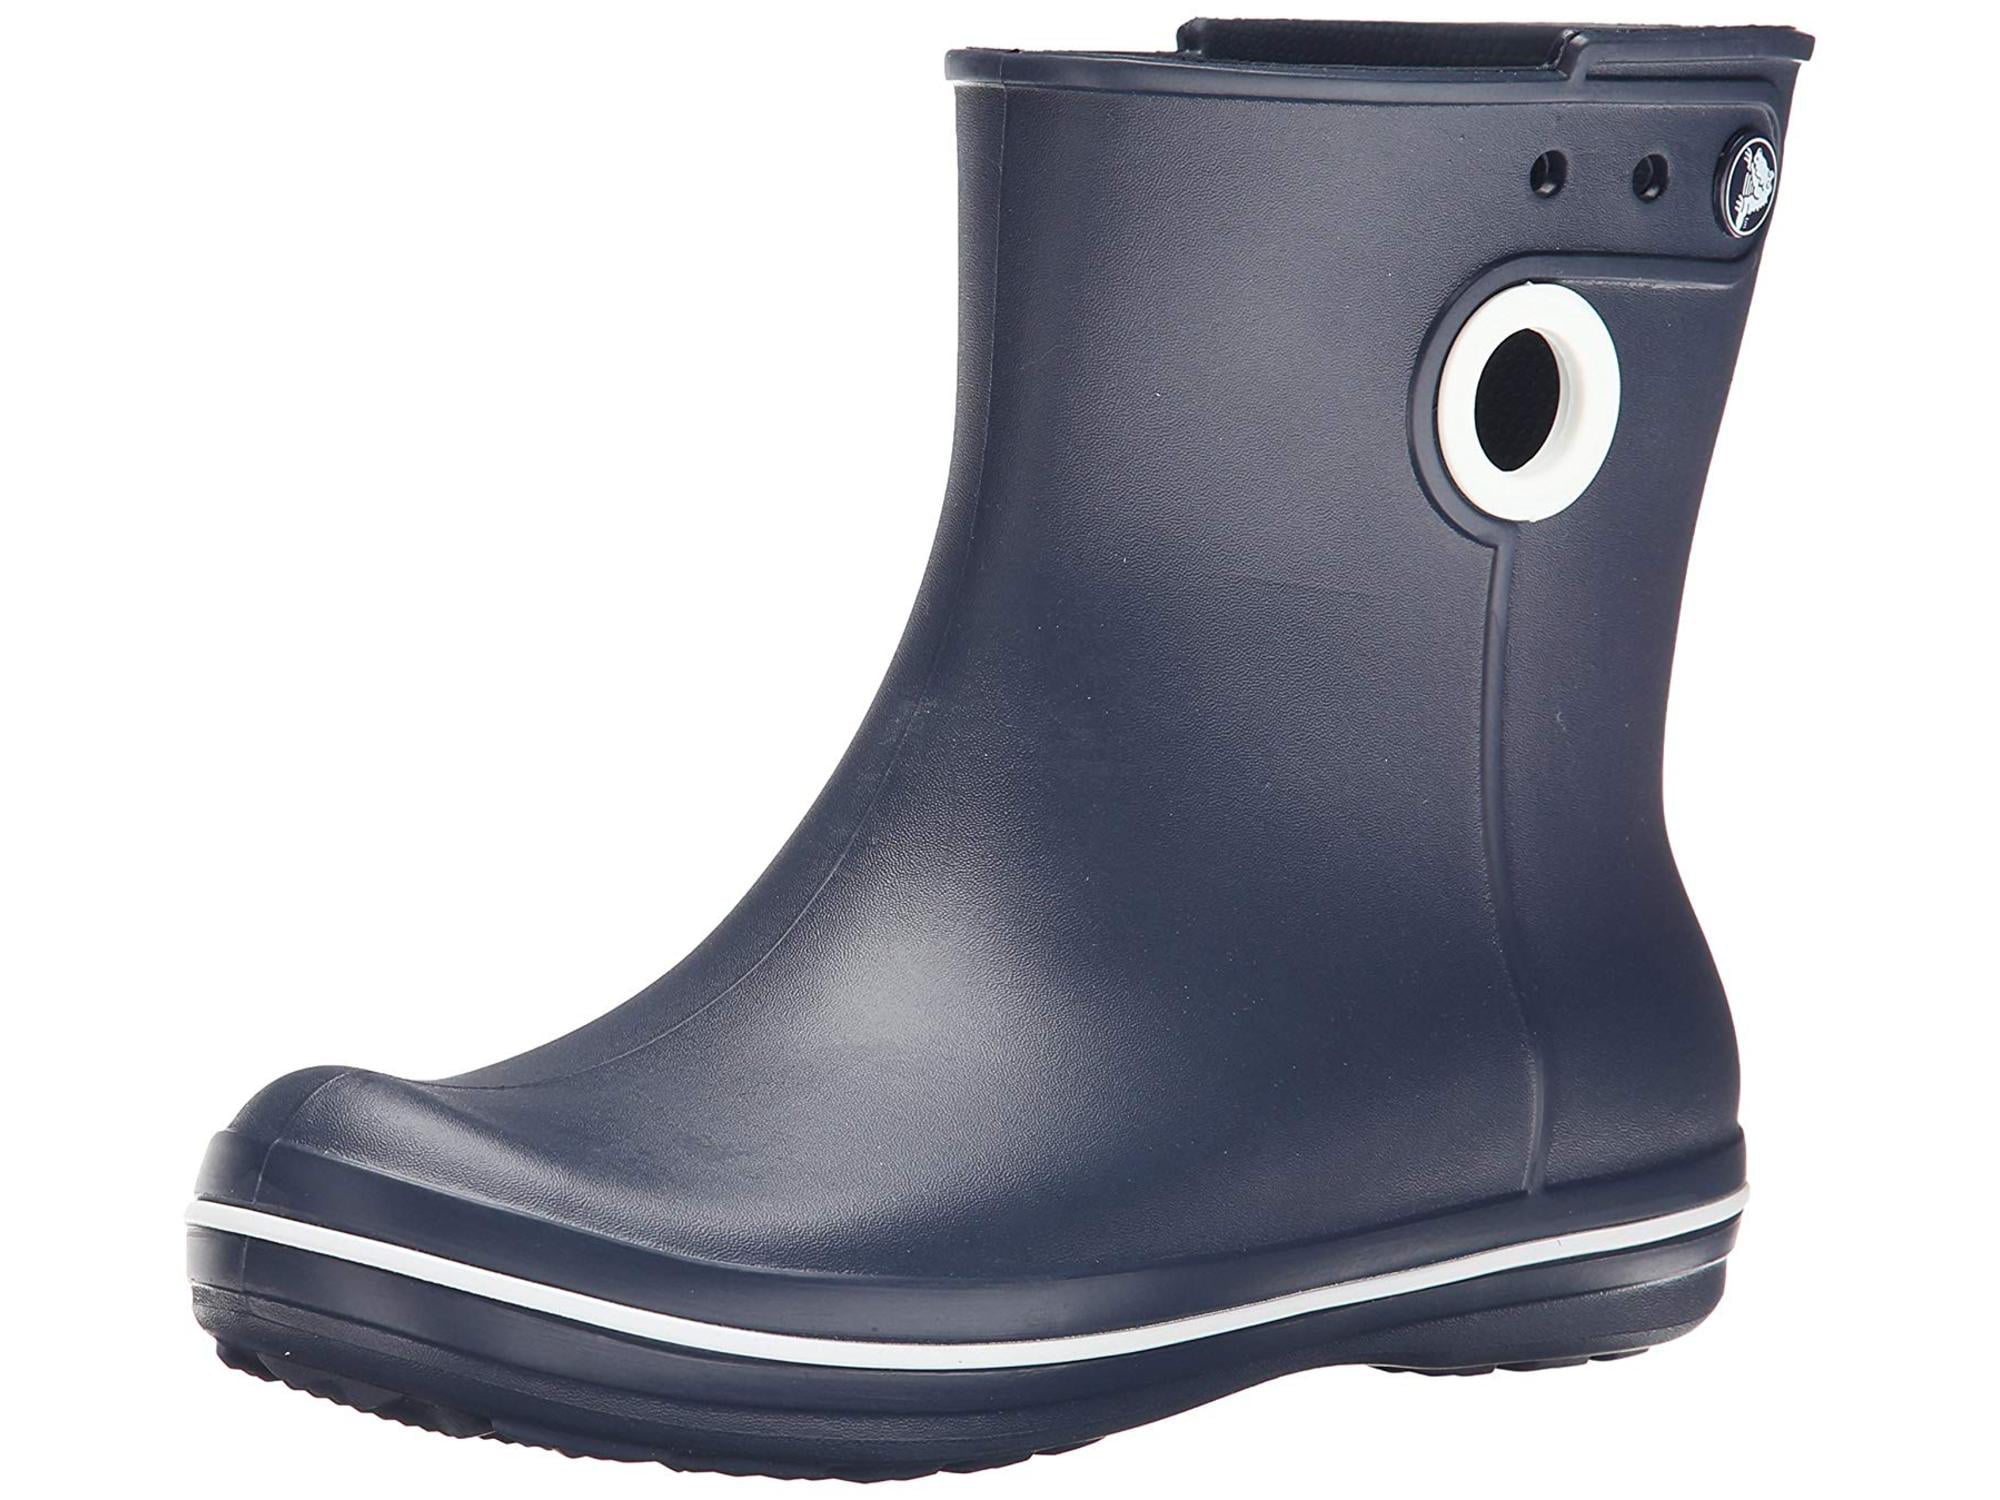 Crocs Womens Jaunt Closed Toe Ankle Cold Weather Boots | Walmart Canada